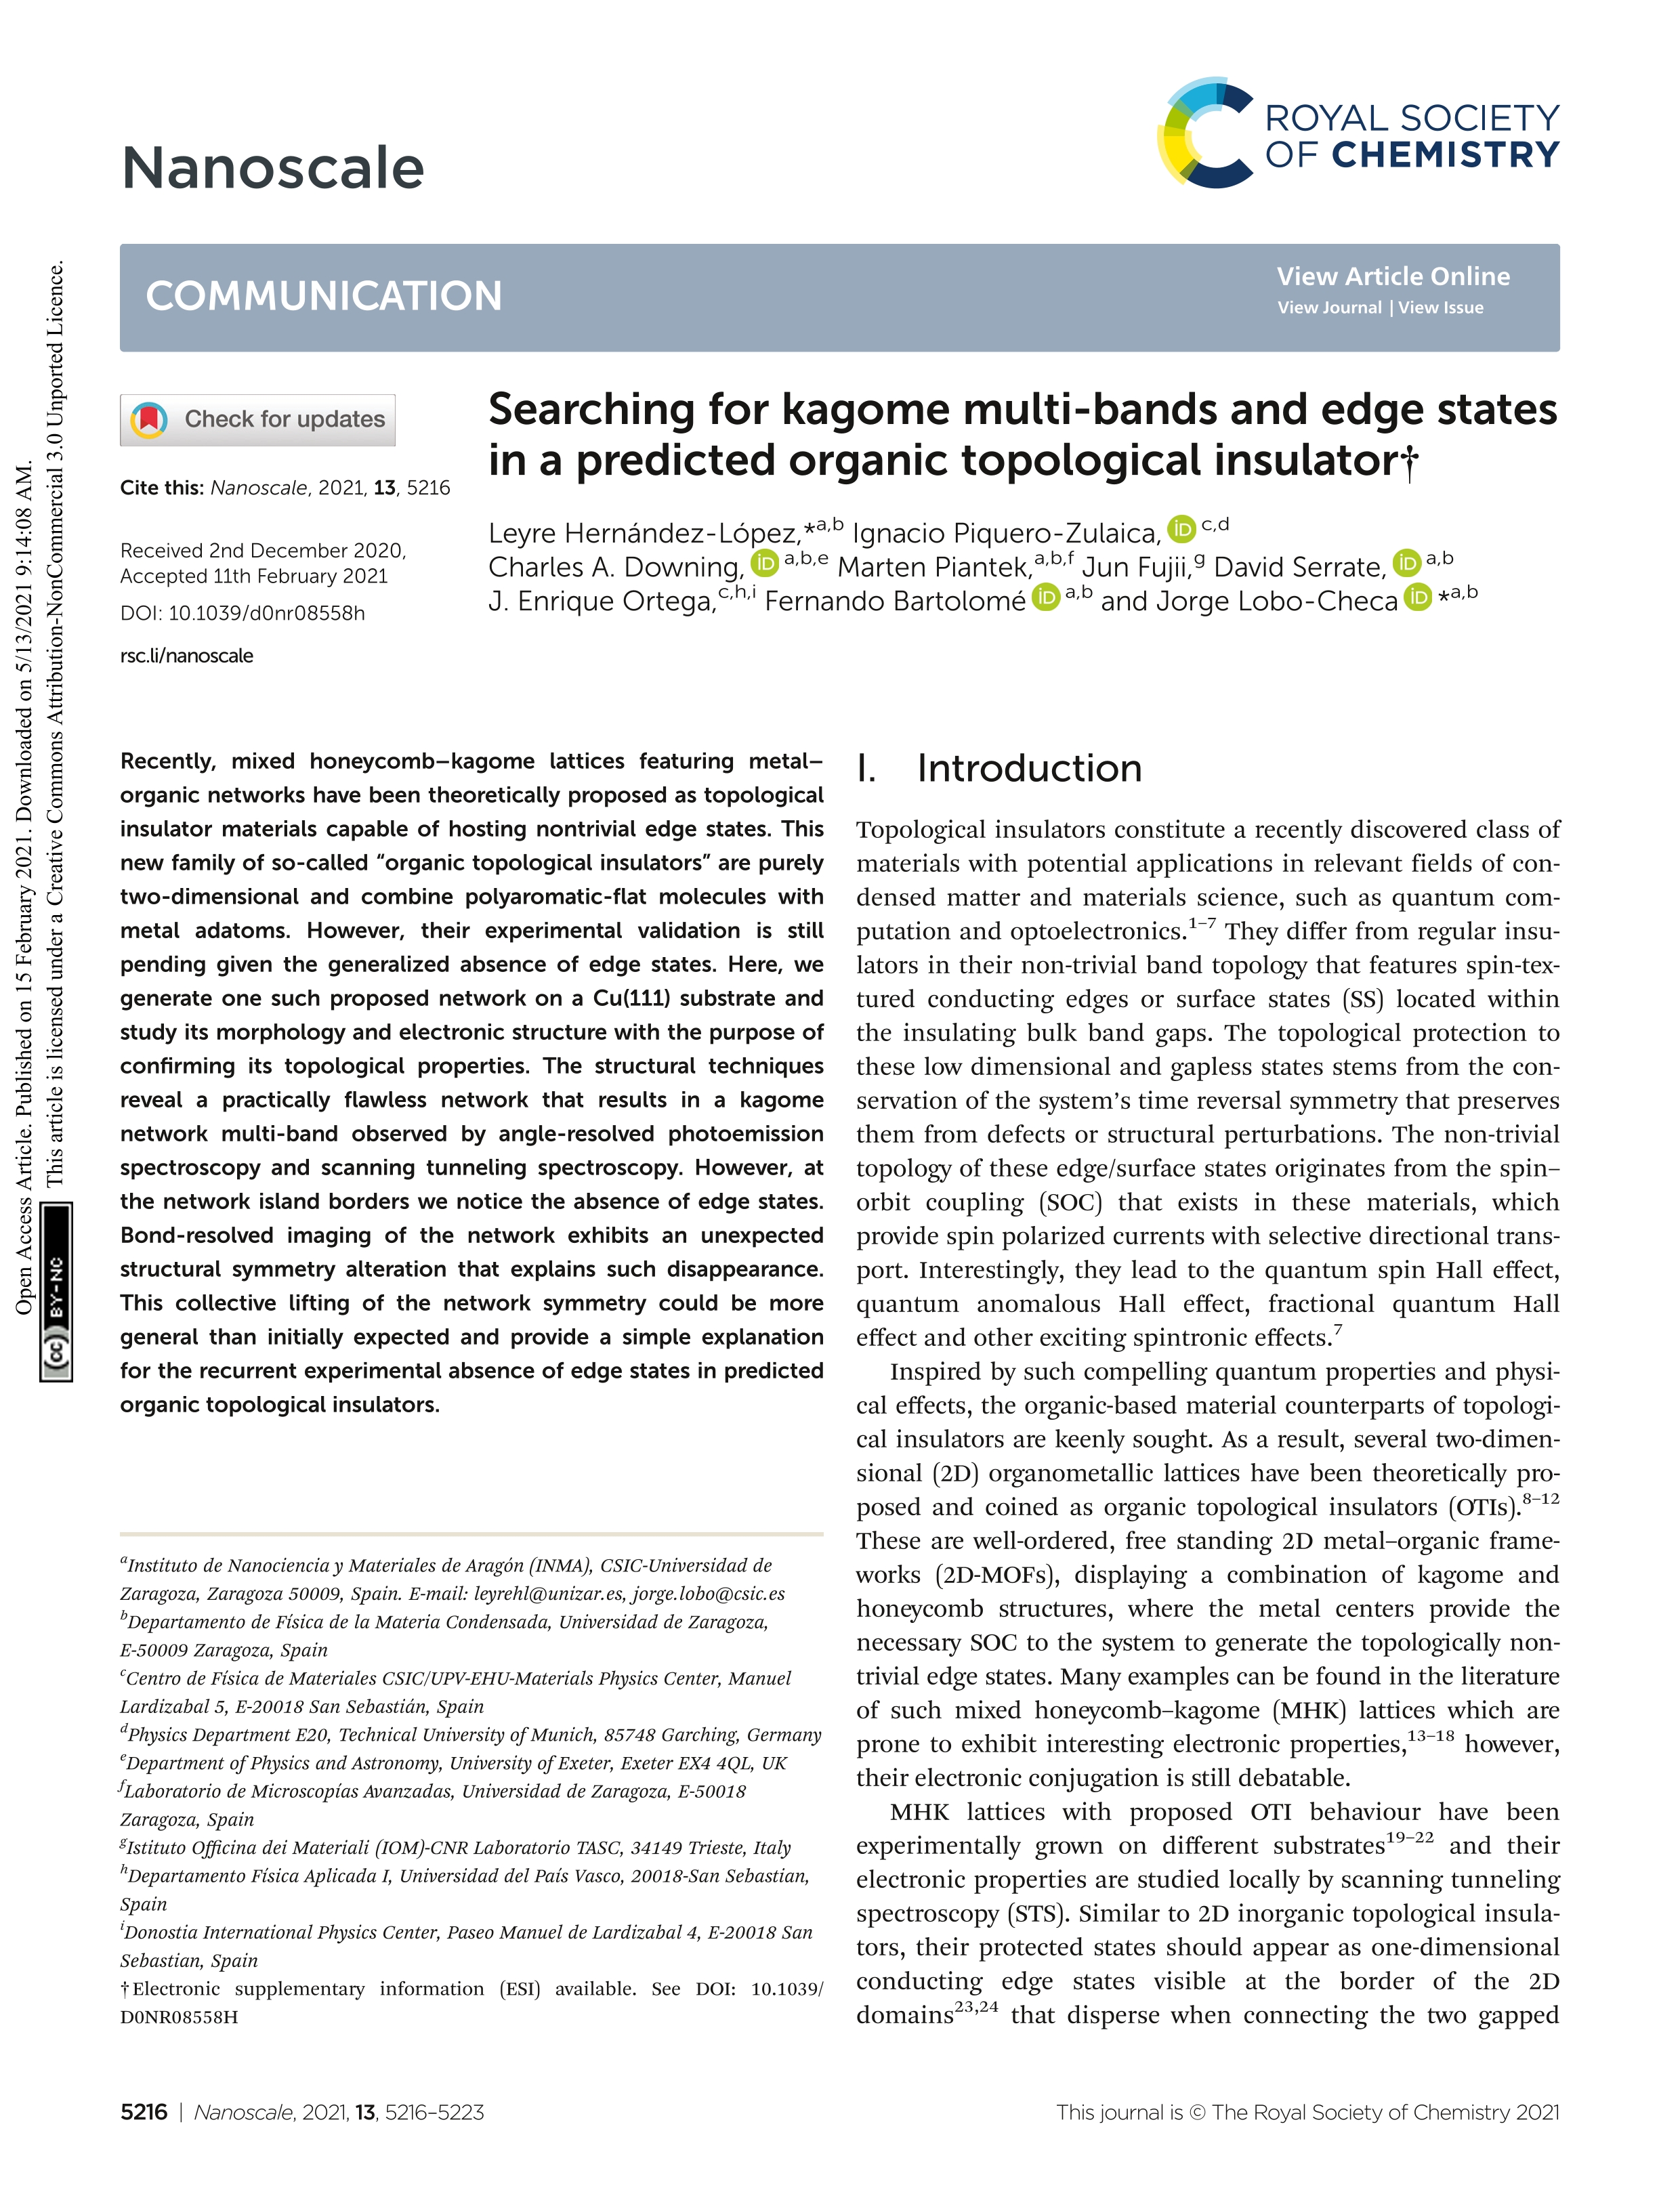 Searching for kagome multi-bands and edge states in a predicted organic topological insulator